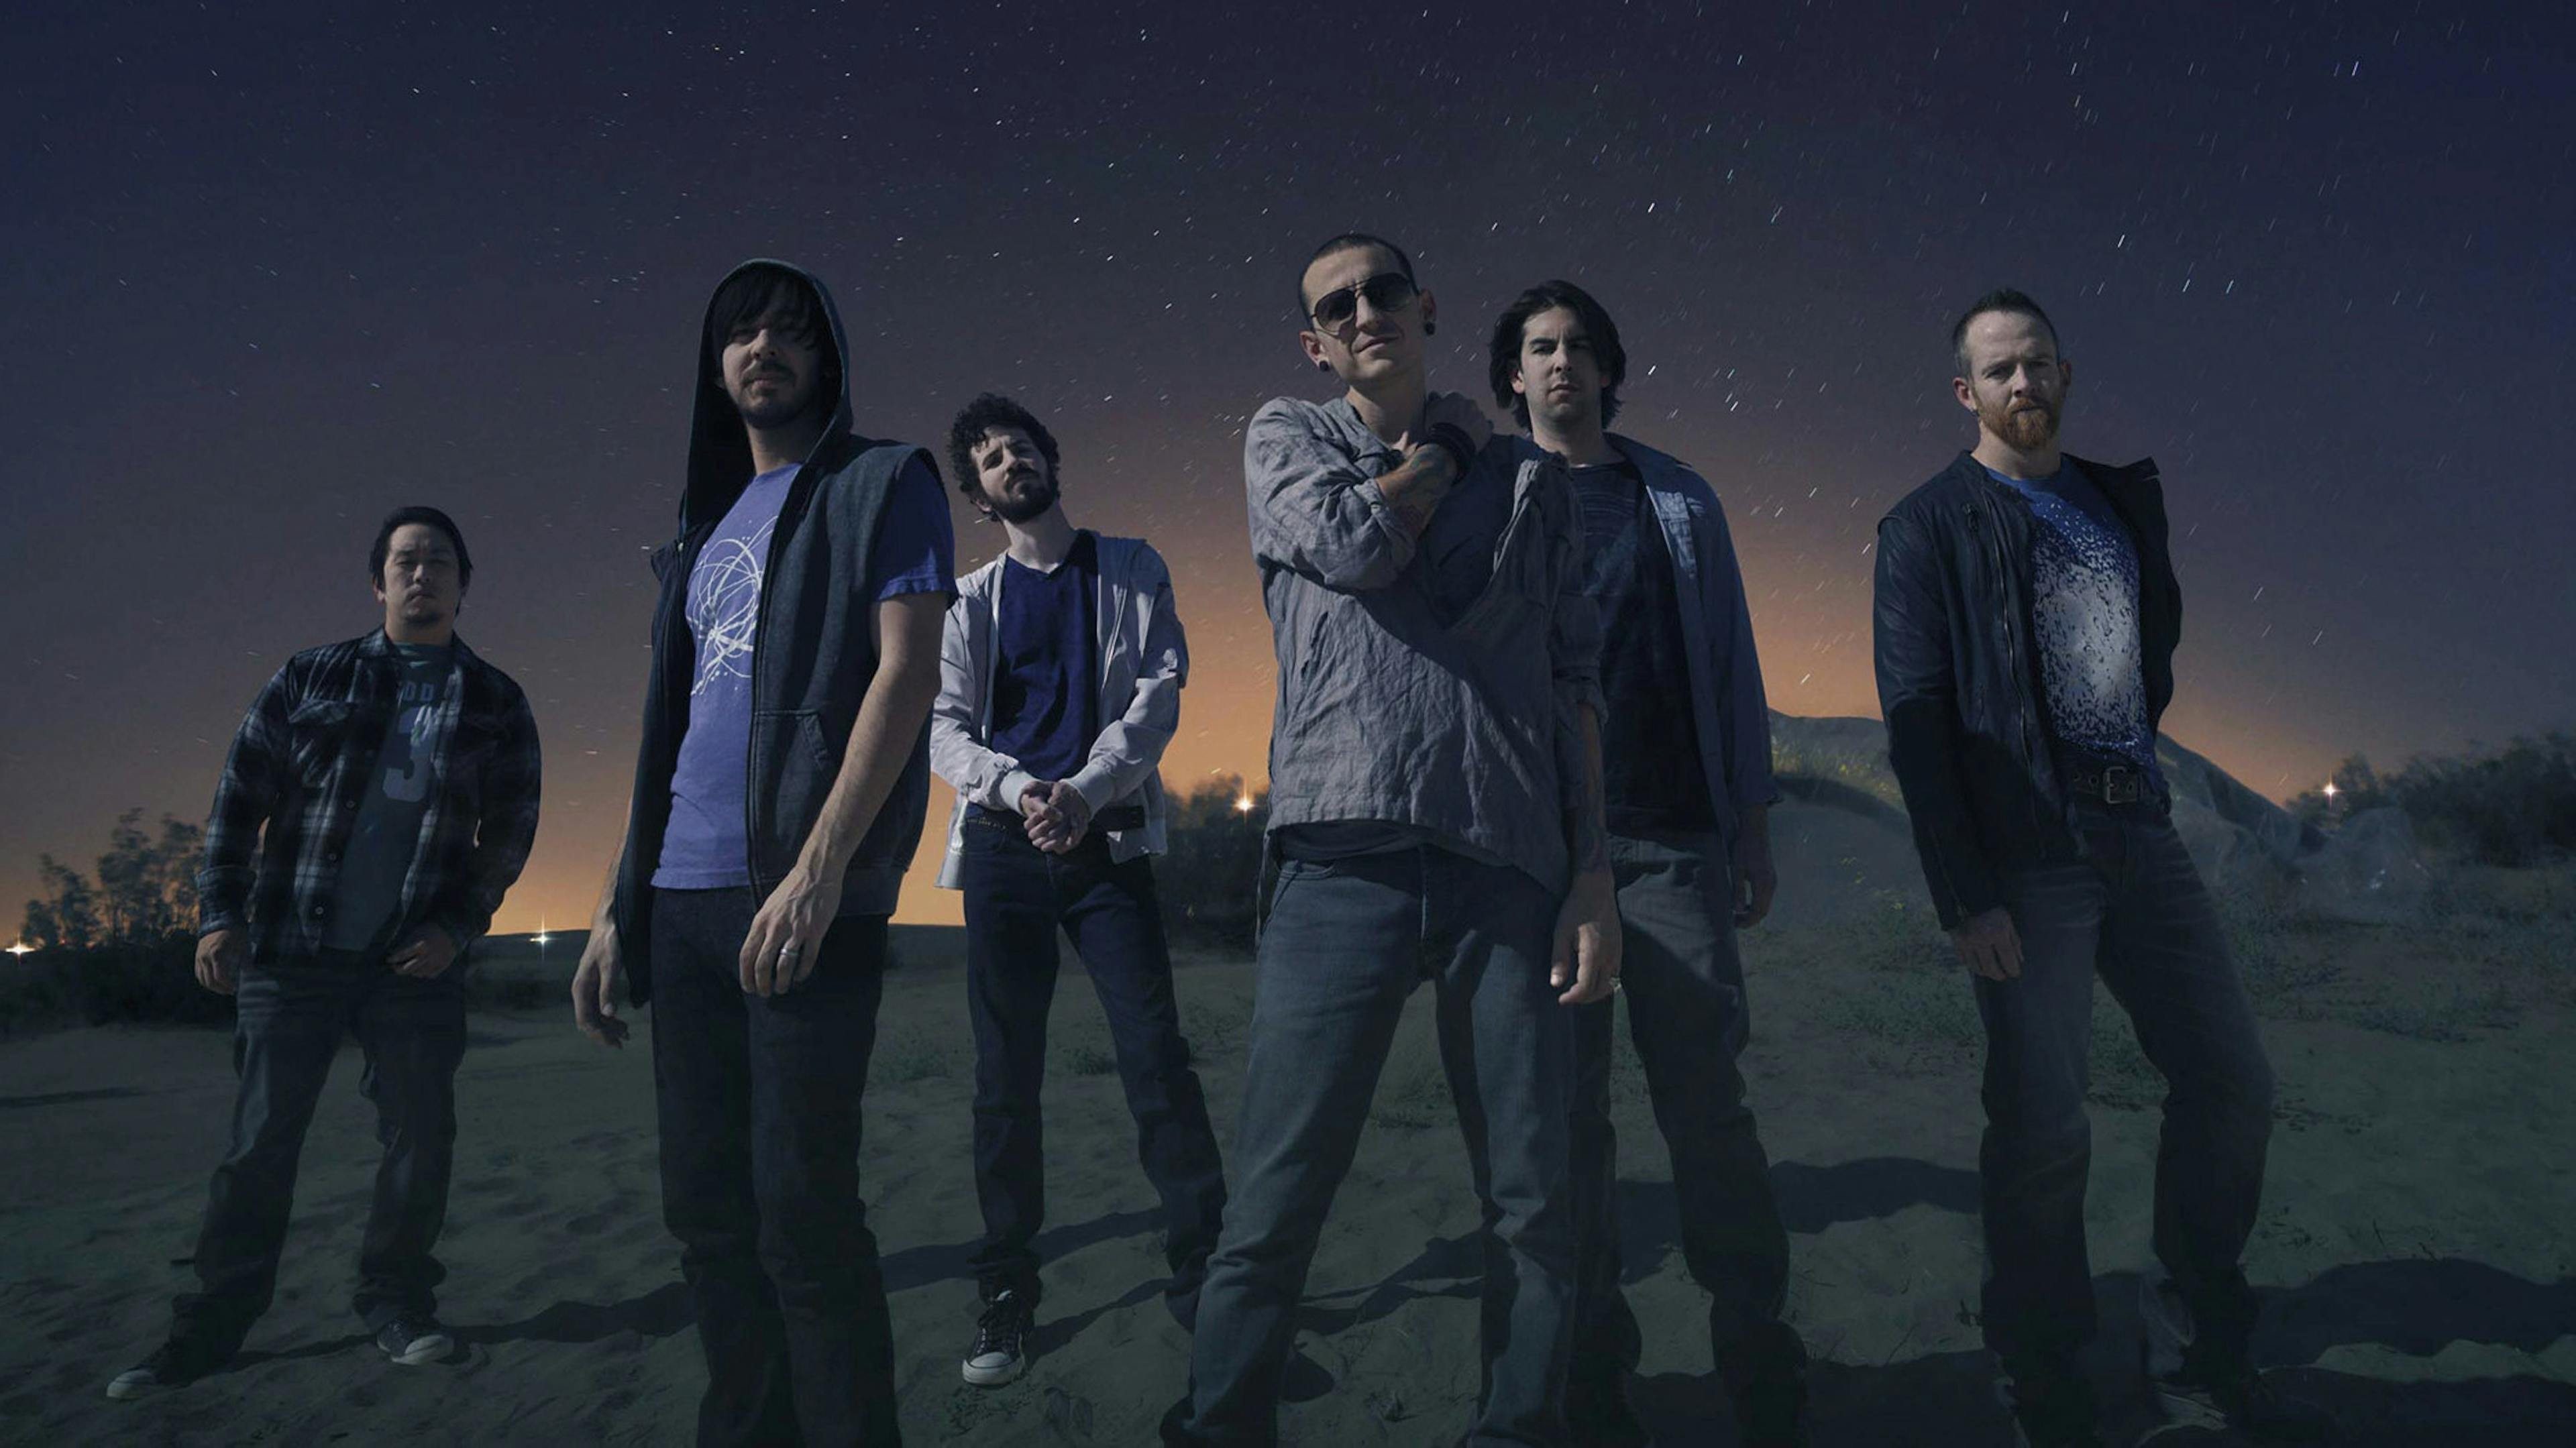 Linkin Park’s A Thousand Suns changed the way we think about concept albums